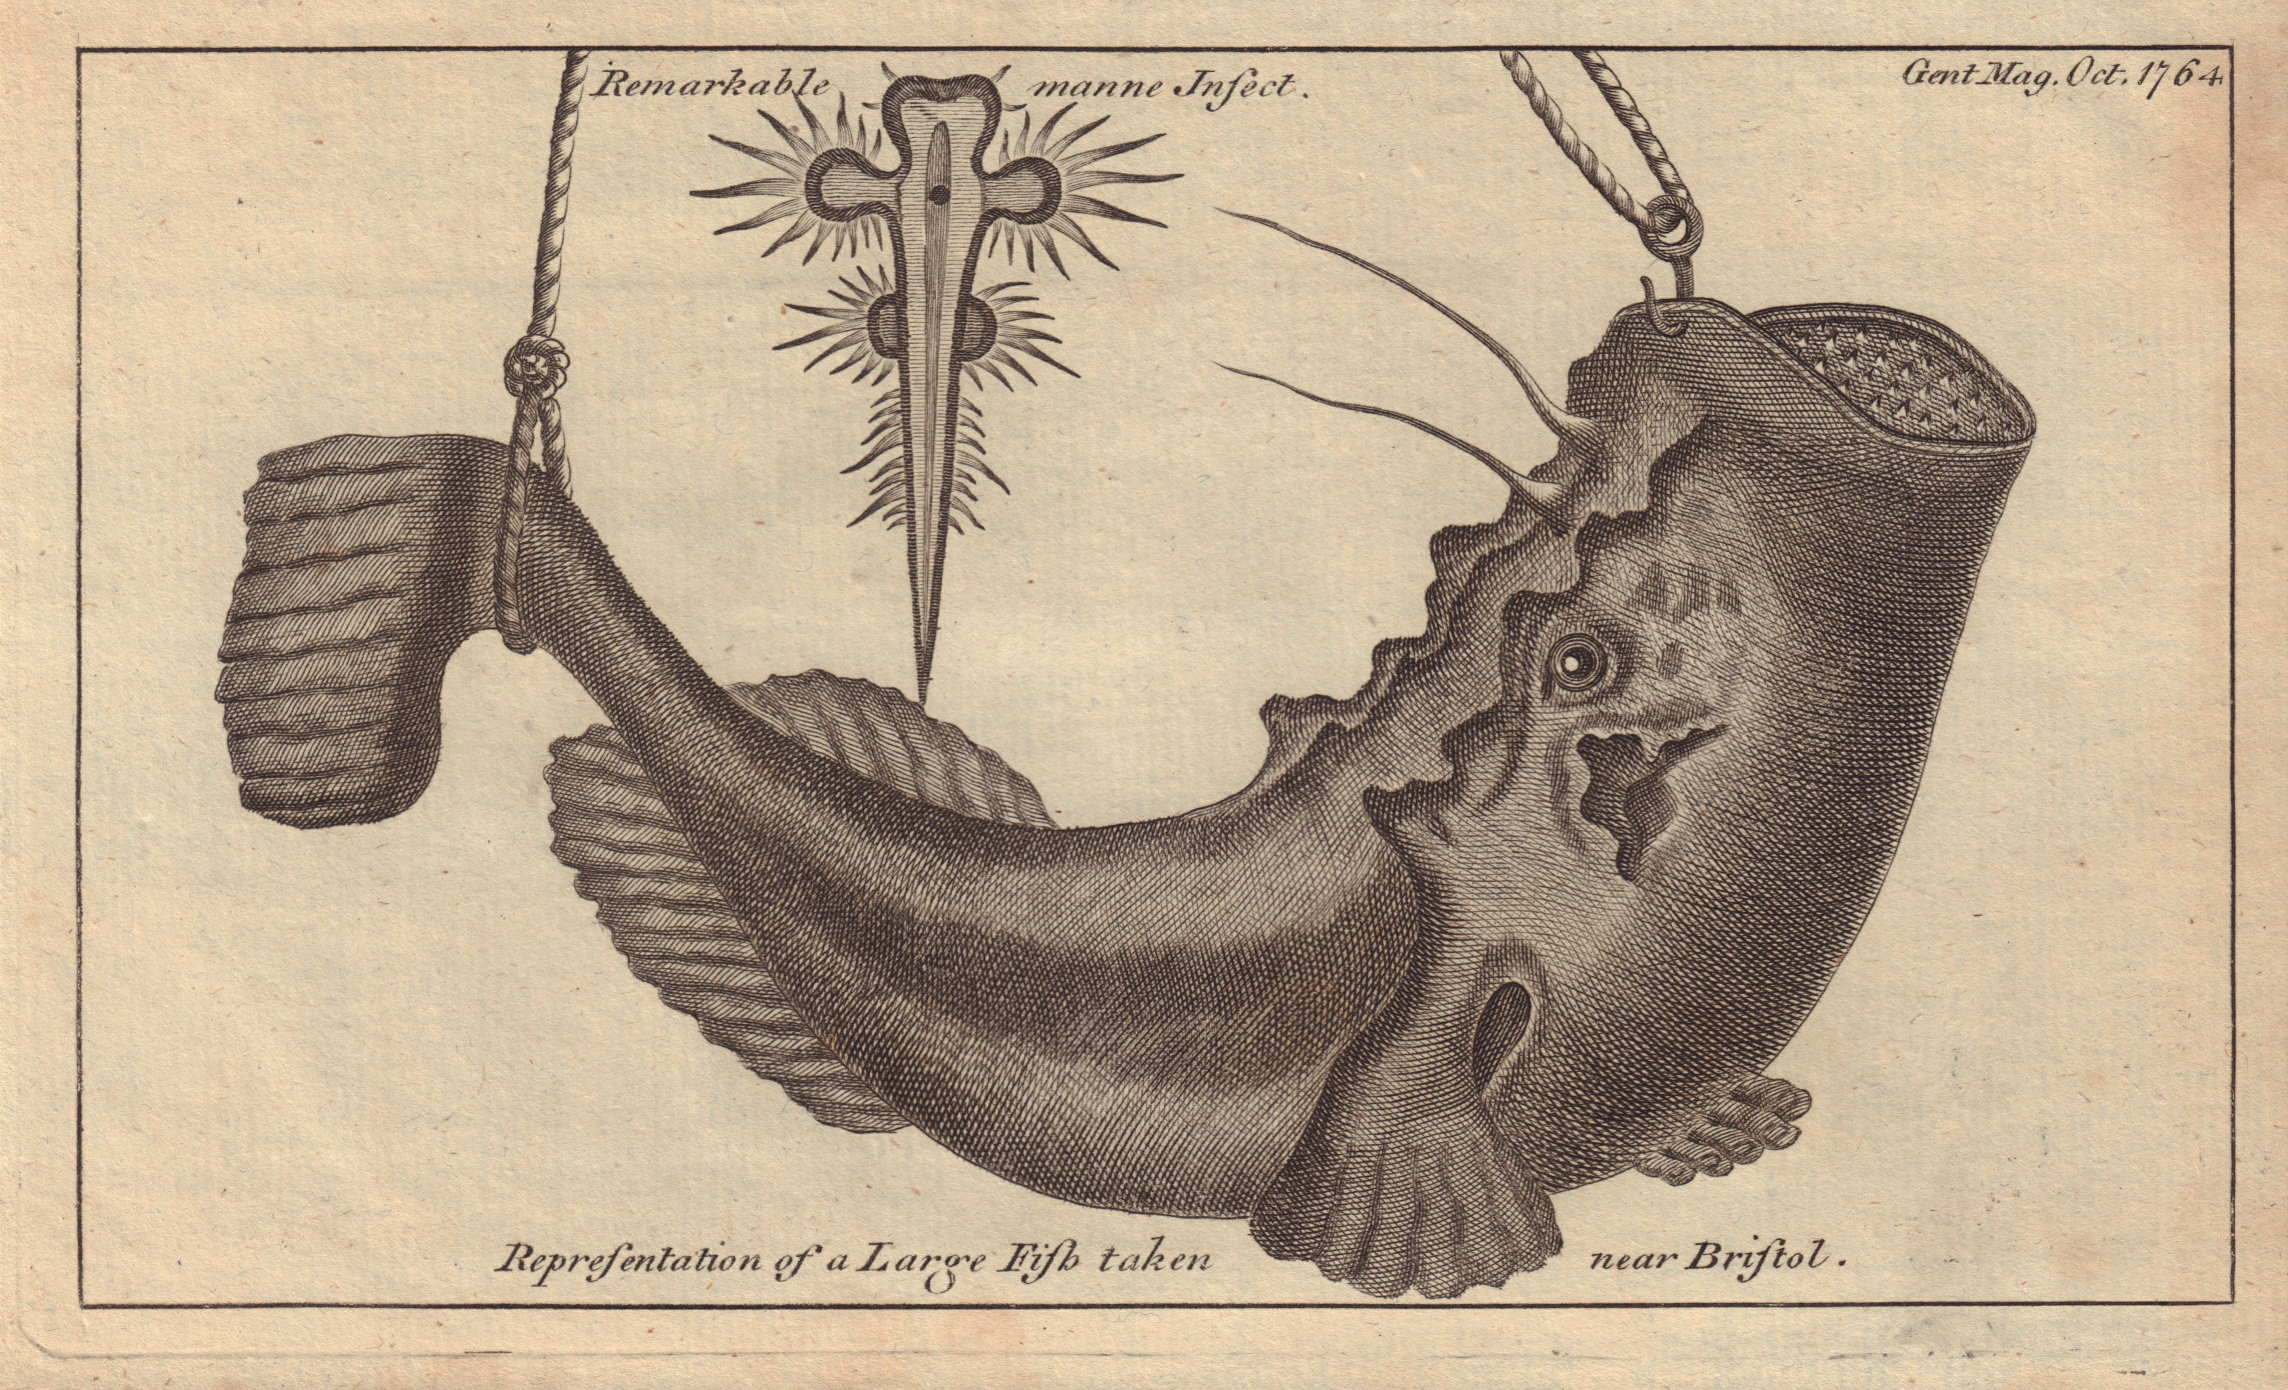 Associate Product A Large Fish taken near Bristol. Remarkable manne Insect. GENTS MAG 1764 print